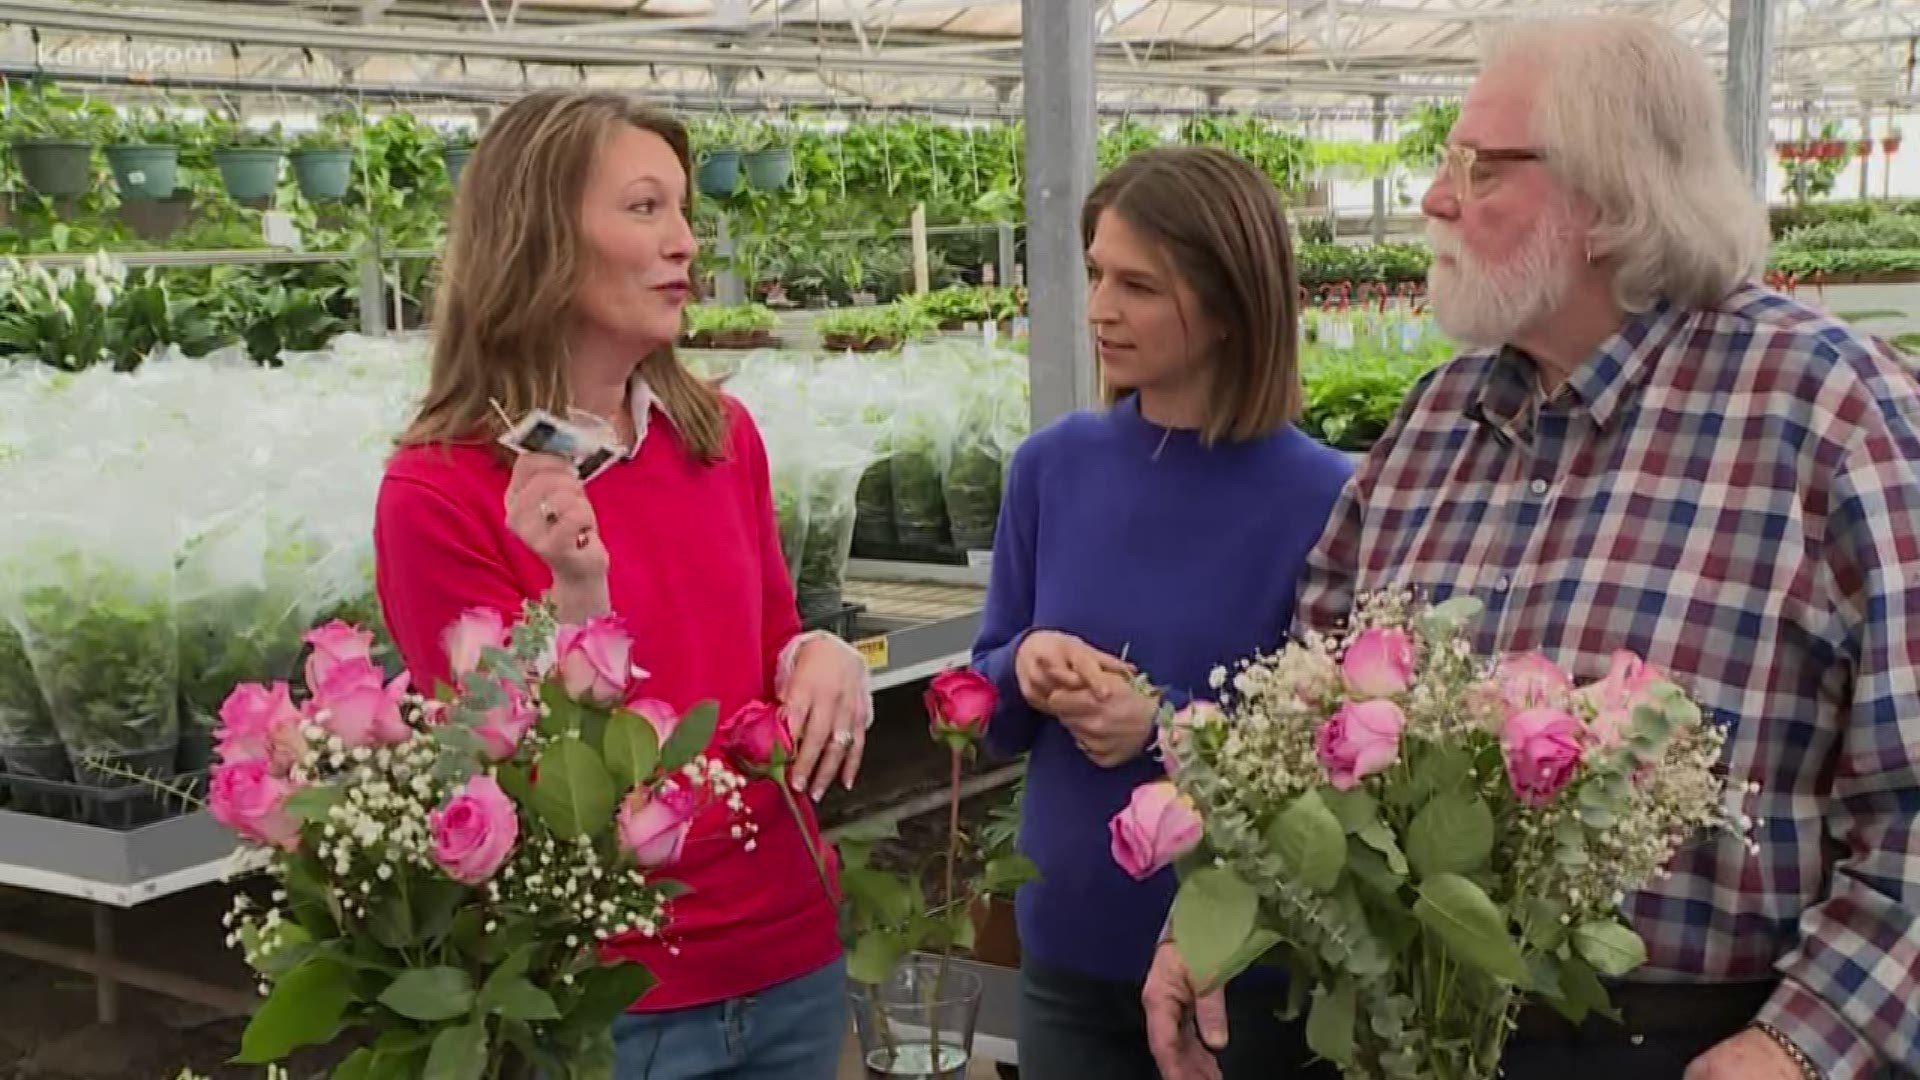 Tips from the experts at Len Busch Roses for keeping your Valentine's Day flowers looking their best in the vase.